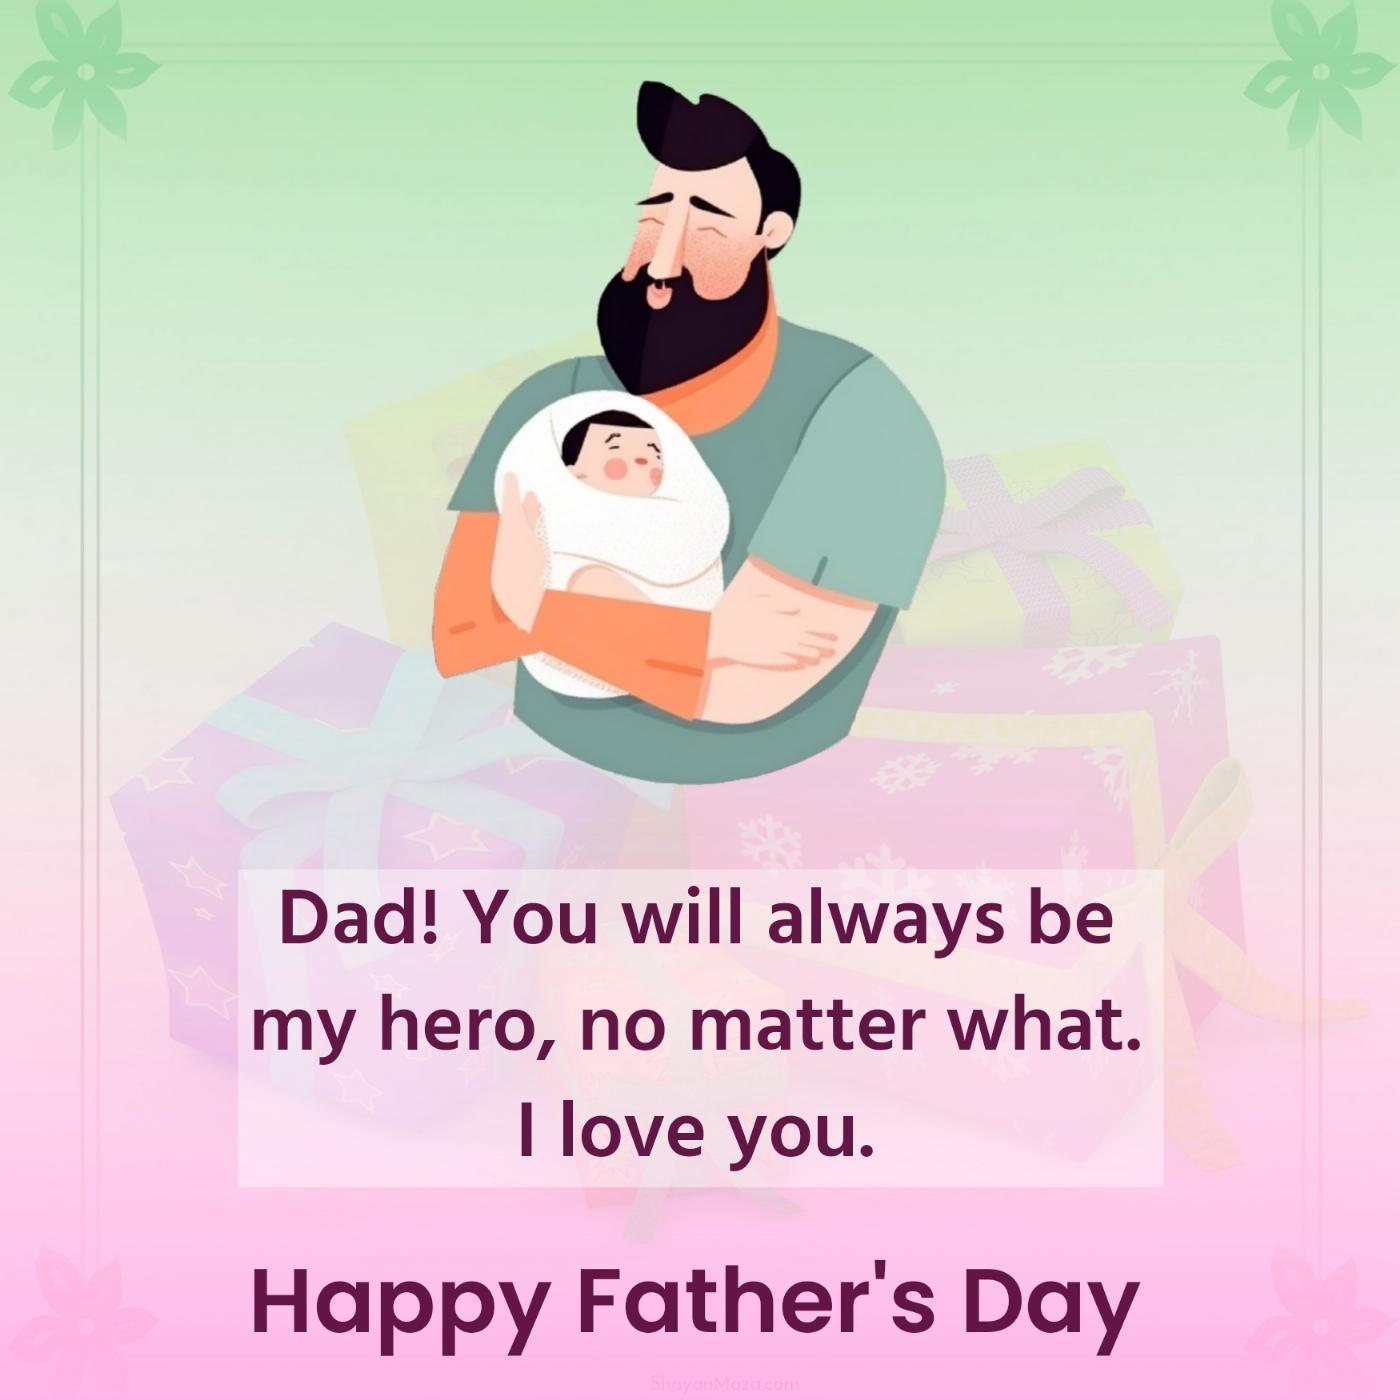 Dad! You will always be my hero no matter what